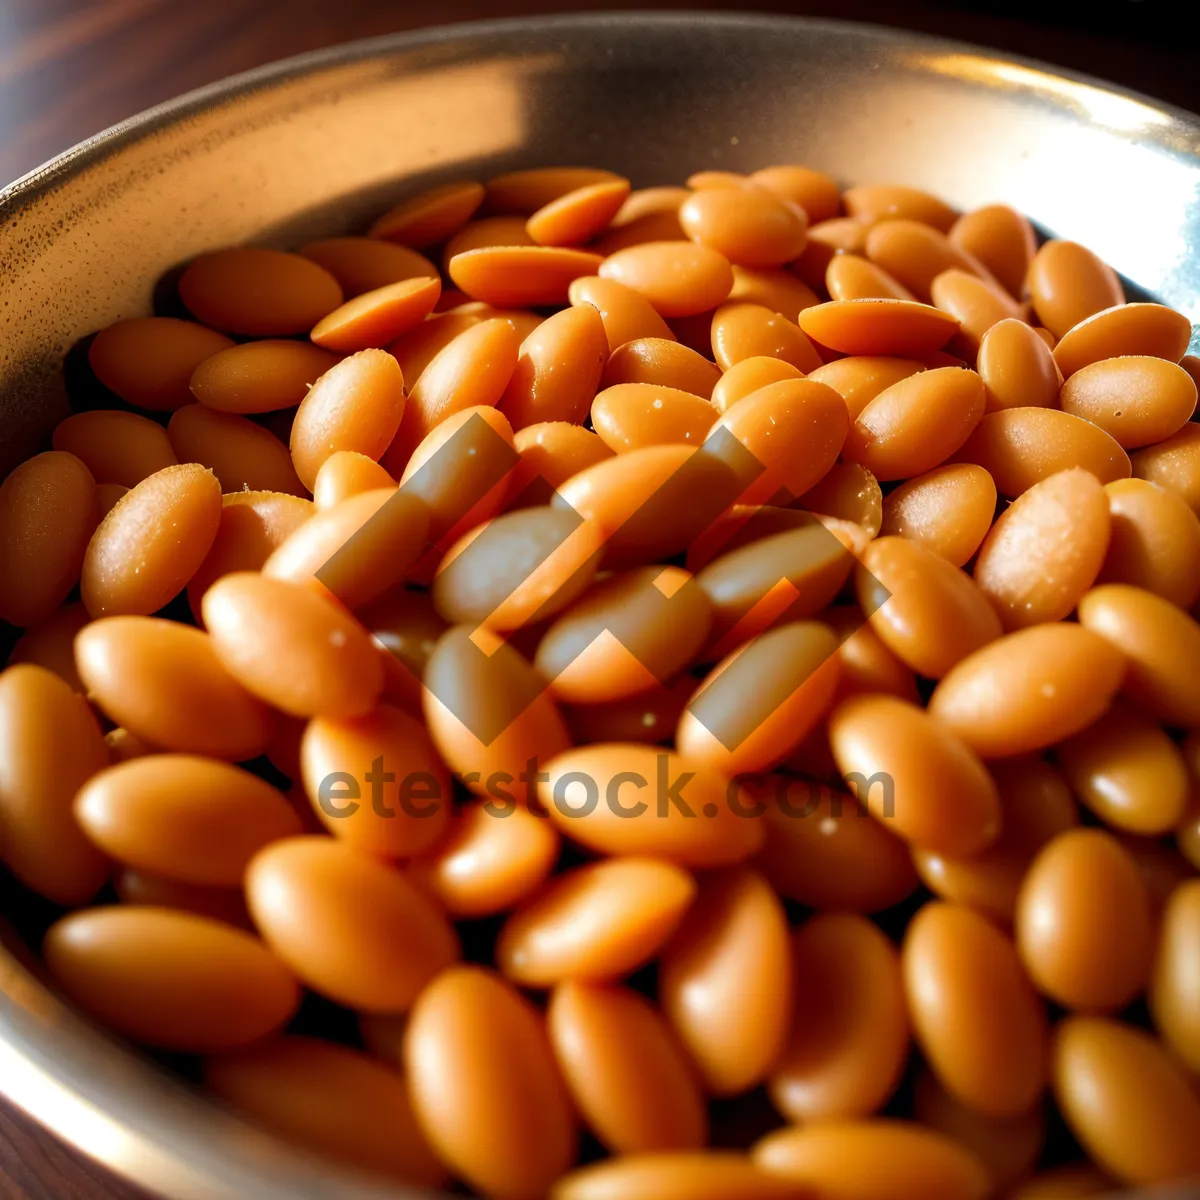 Picture of Nutritious Organic Legume Medley: Beans, Peanuts, and Lentils